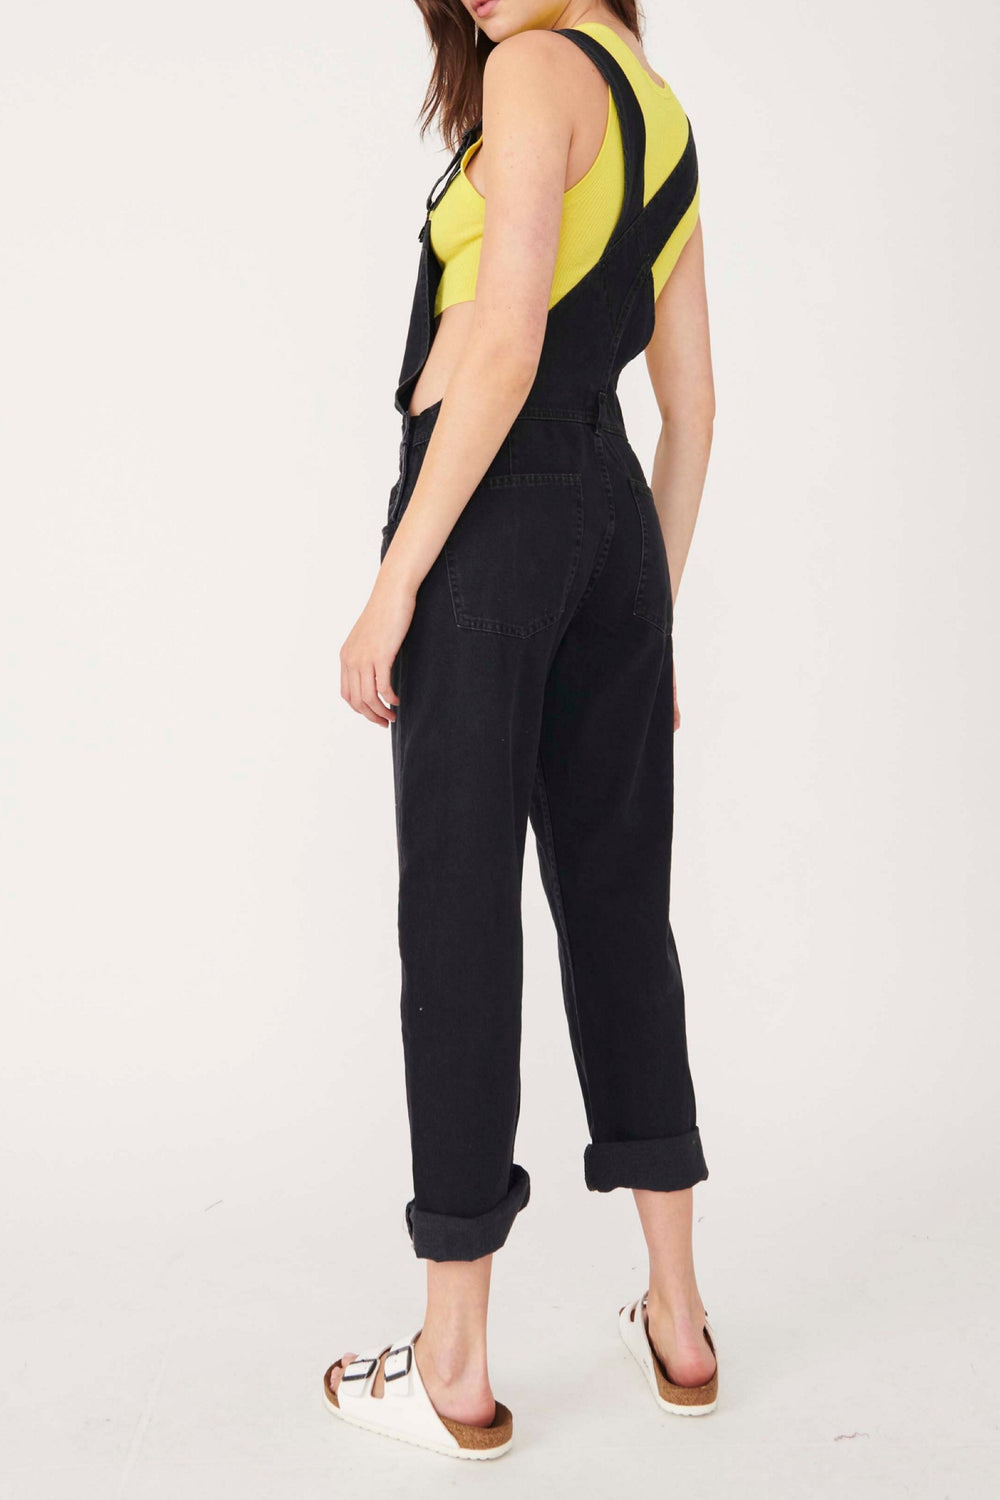 Mineral Black Ziggy Overall